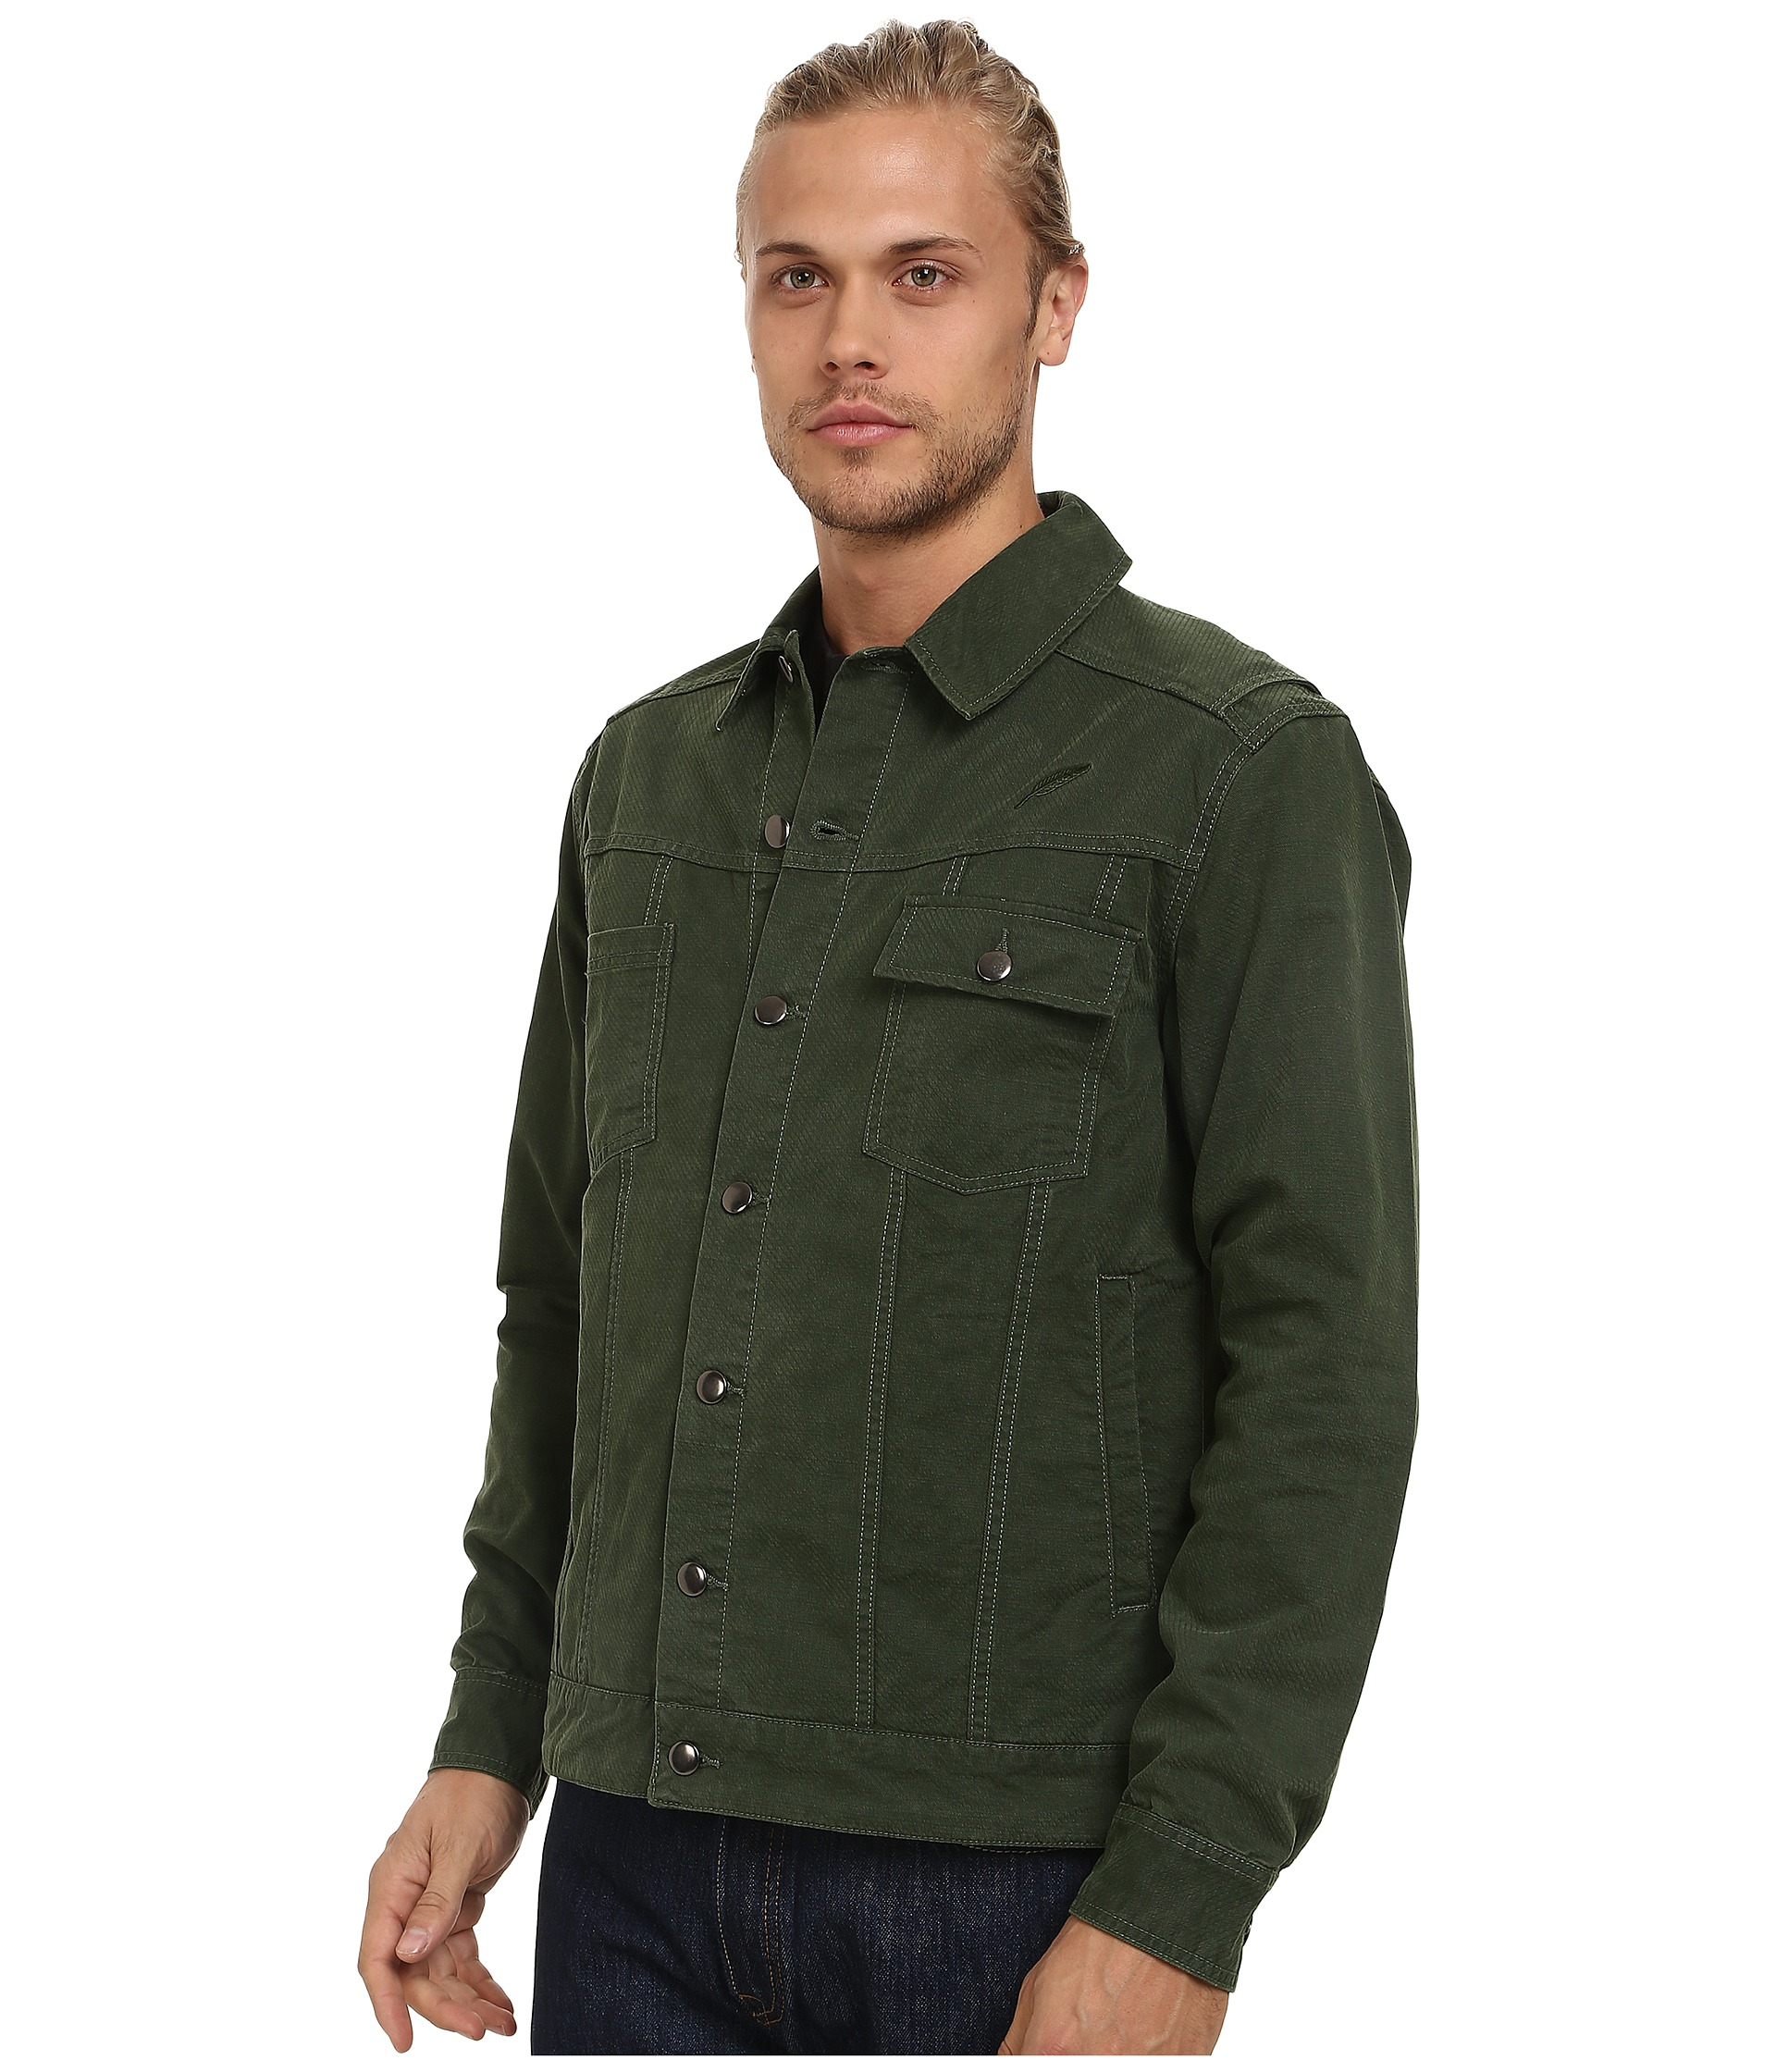 Lyst - Timberland Tanner Twill On Denim Jacket in Green for Men